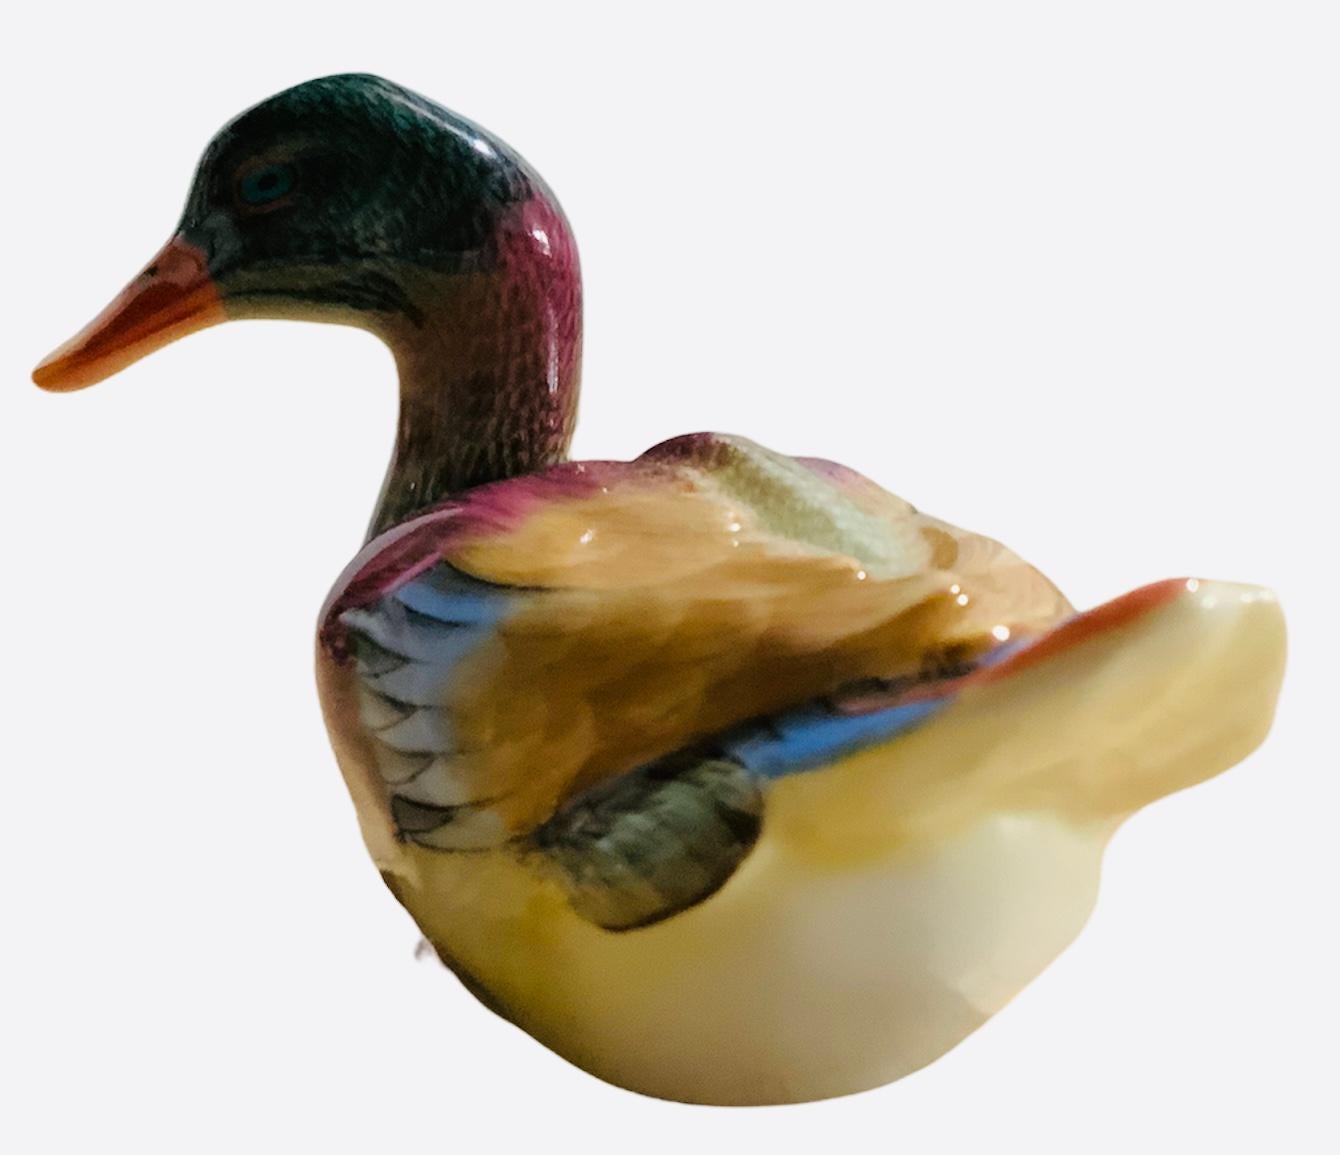 This is a Herend porcelain hand painted wild duck. It has eye catching bright colors in its whole body. The duck’s eyes are blue color. Its beak is orange-yellow as well as its feet. Below the base is the Herend hallmark.